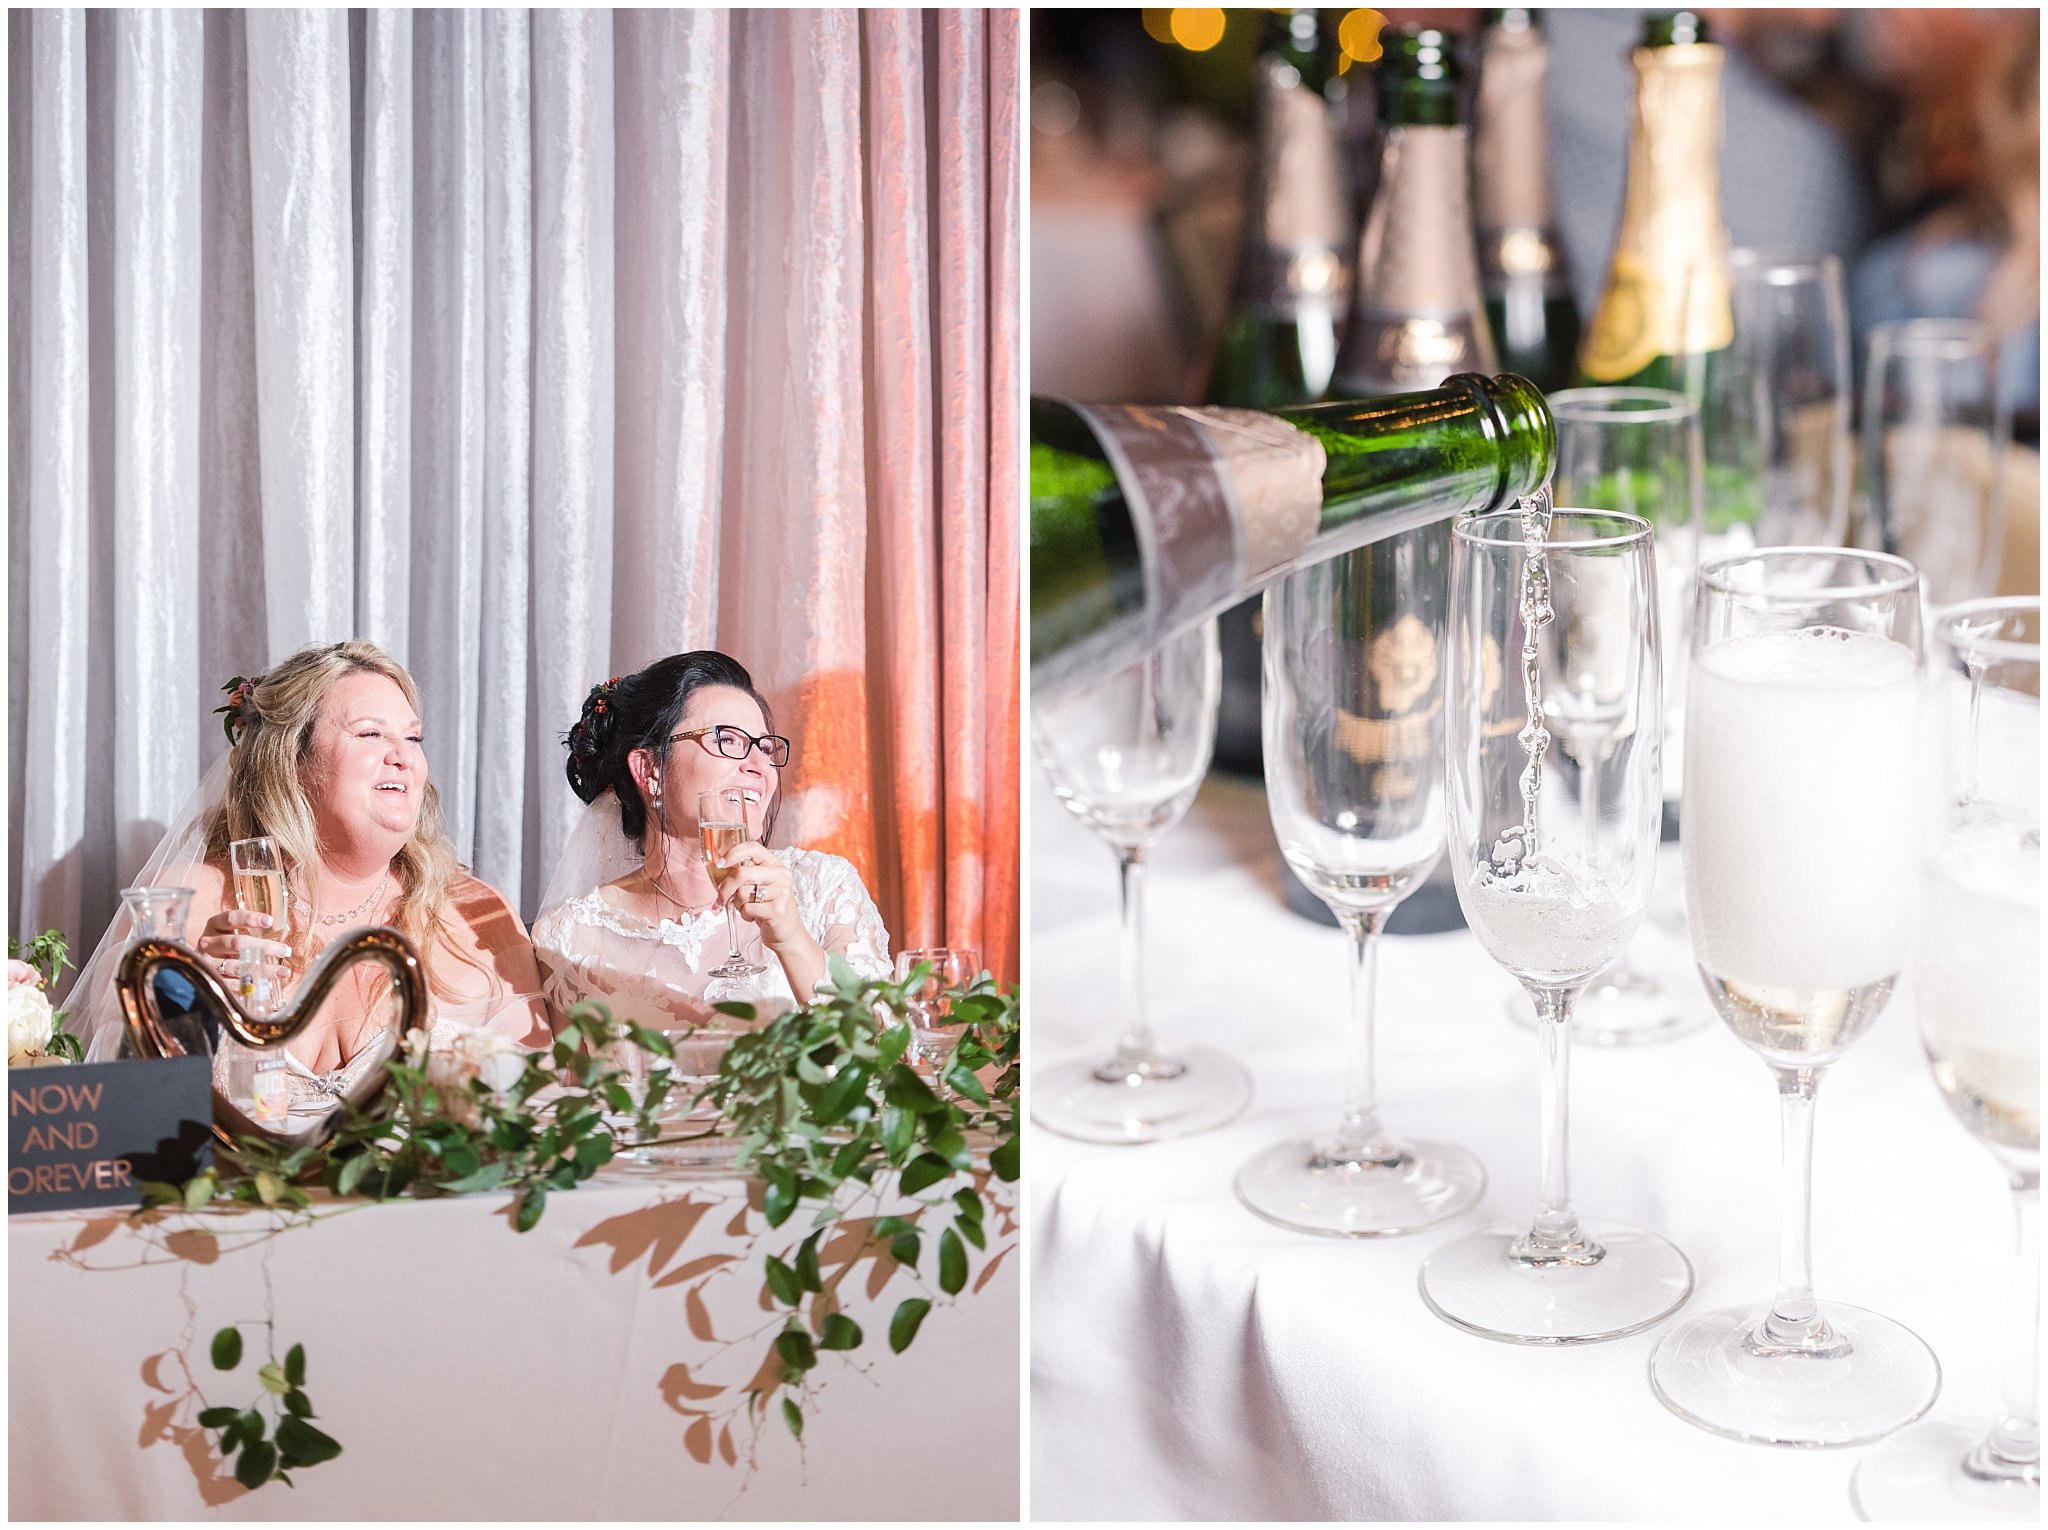 Toasts during wedding dinner and champagne glasses | Park City Wedding at the Hyatt Centric | Jessie and Dallin Photography